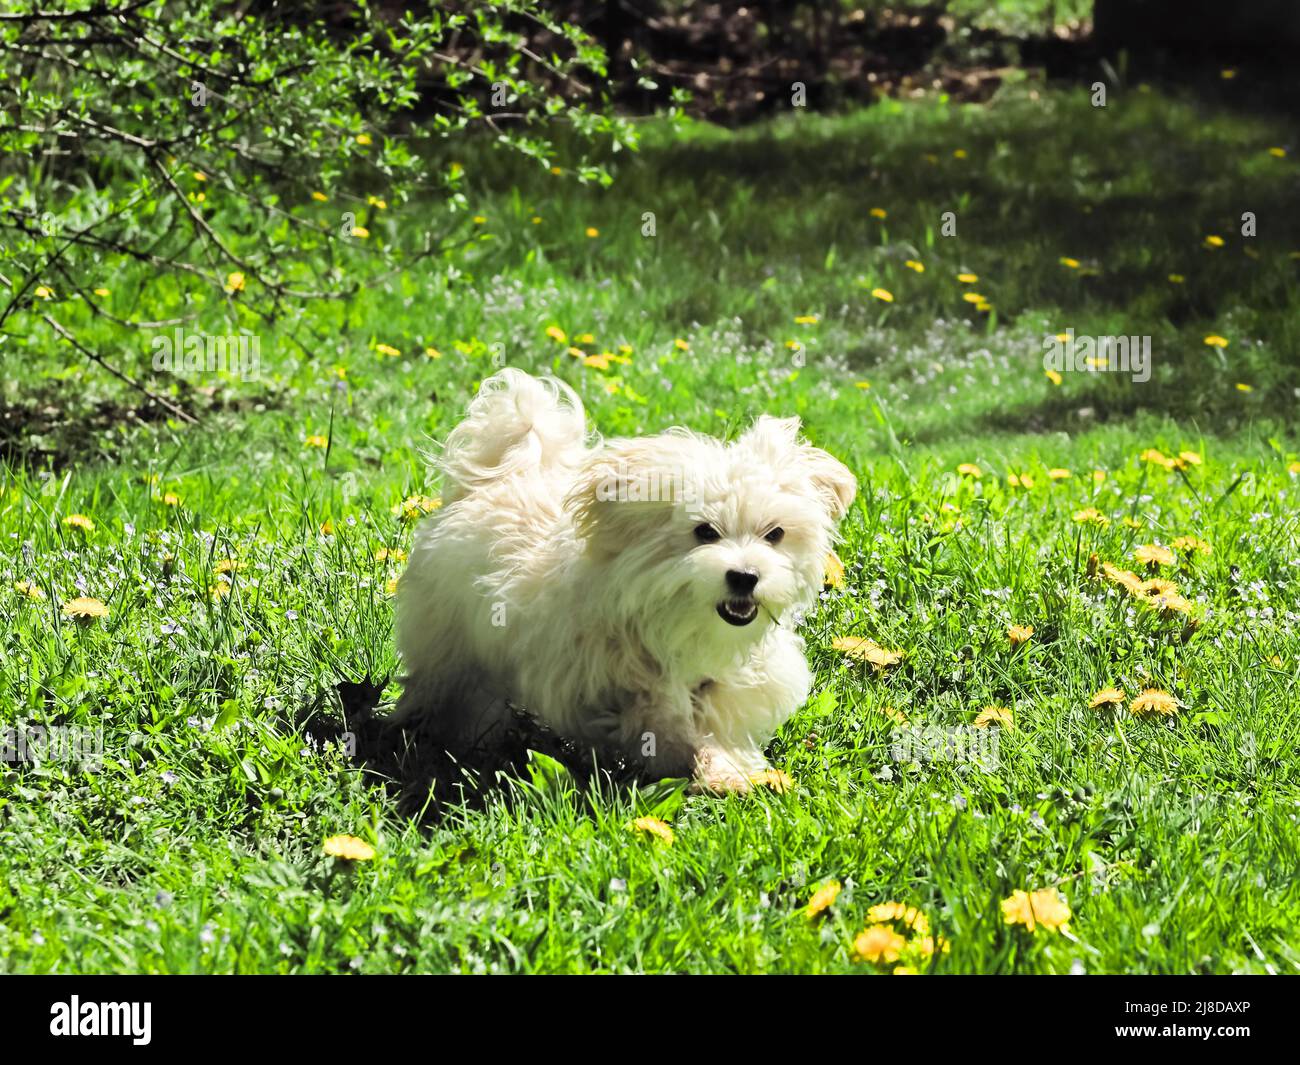 Maltese Bichon puppy running with blade of grass in his mouth Stock Photo